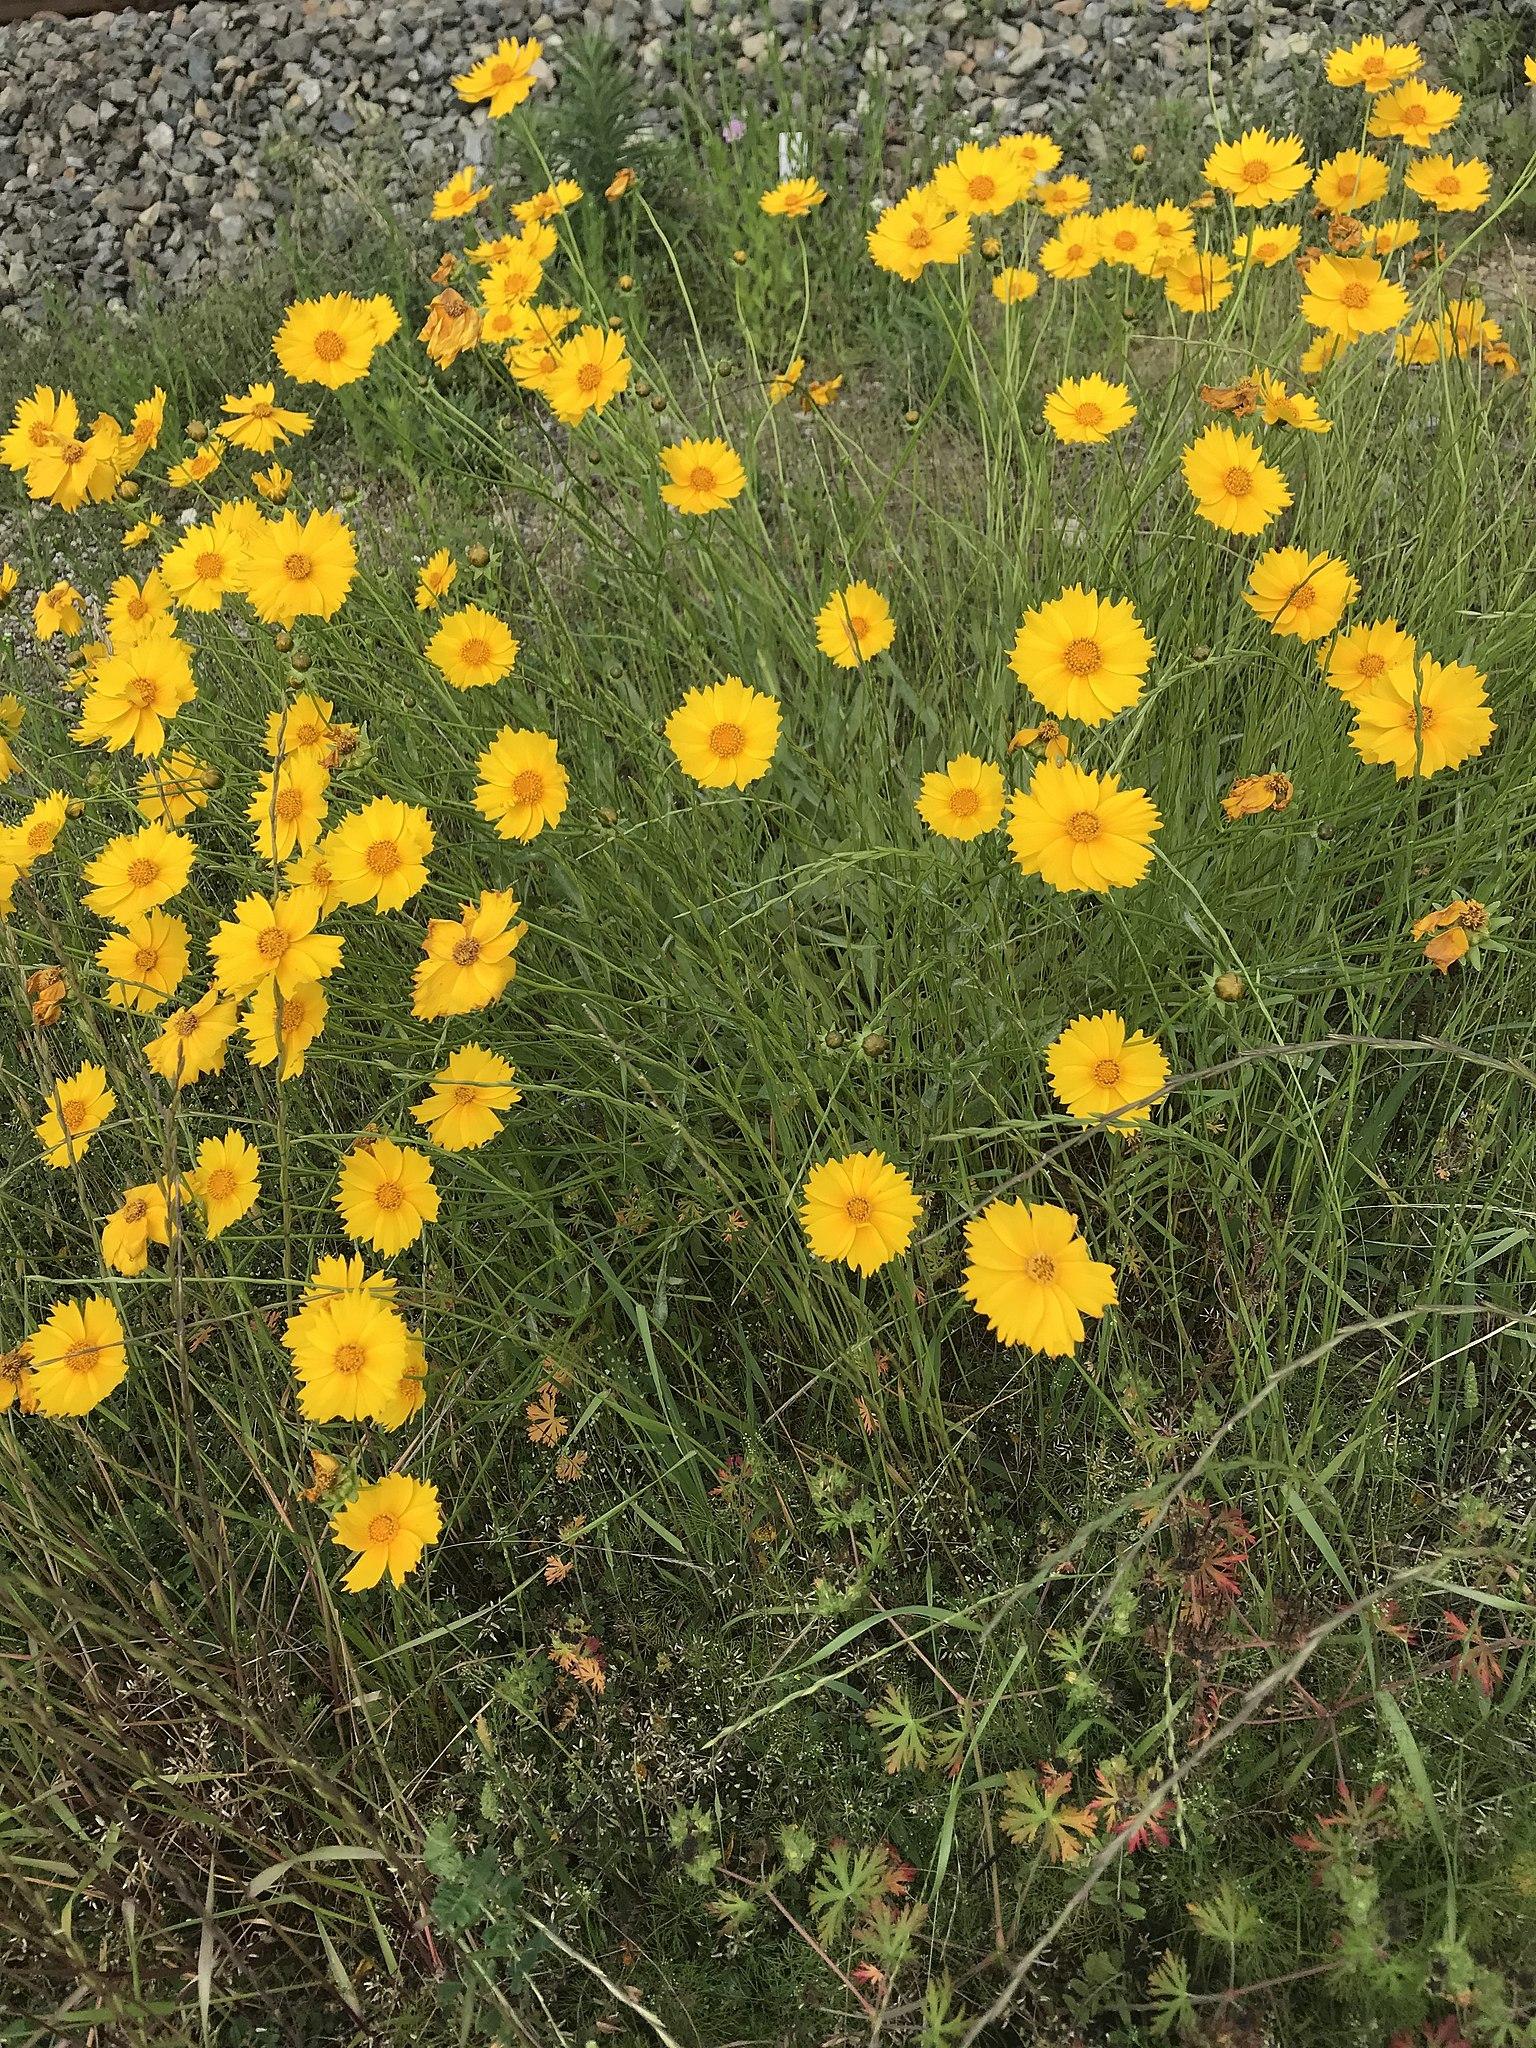 yellow flowers with orange center, green leaves and stems